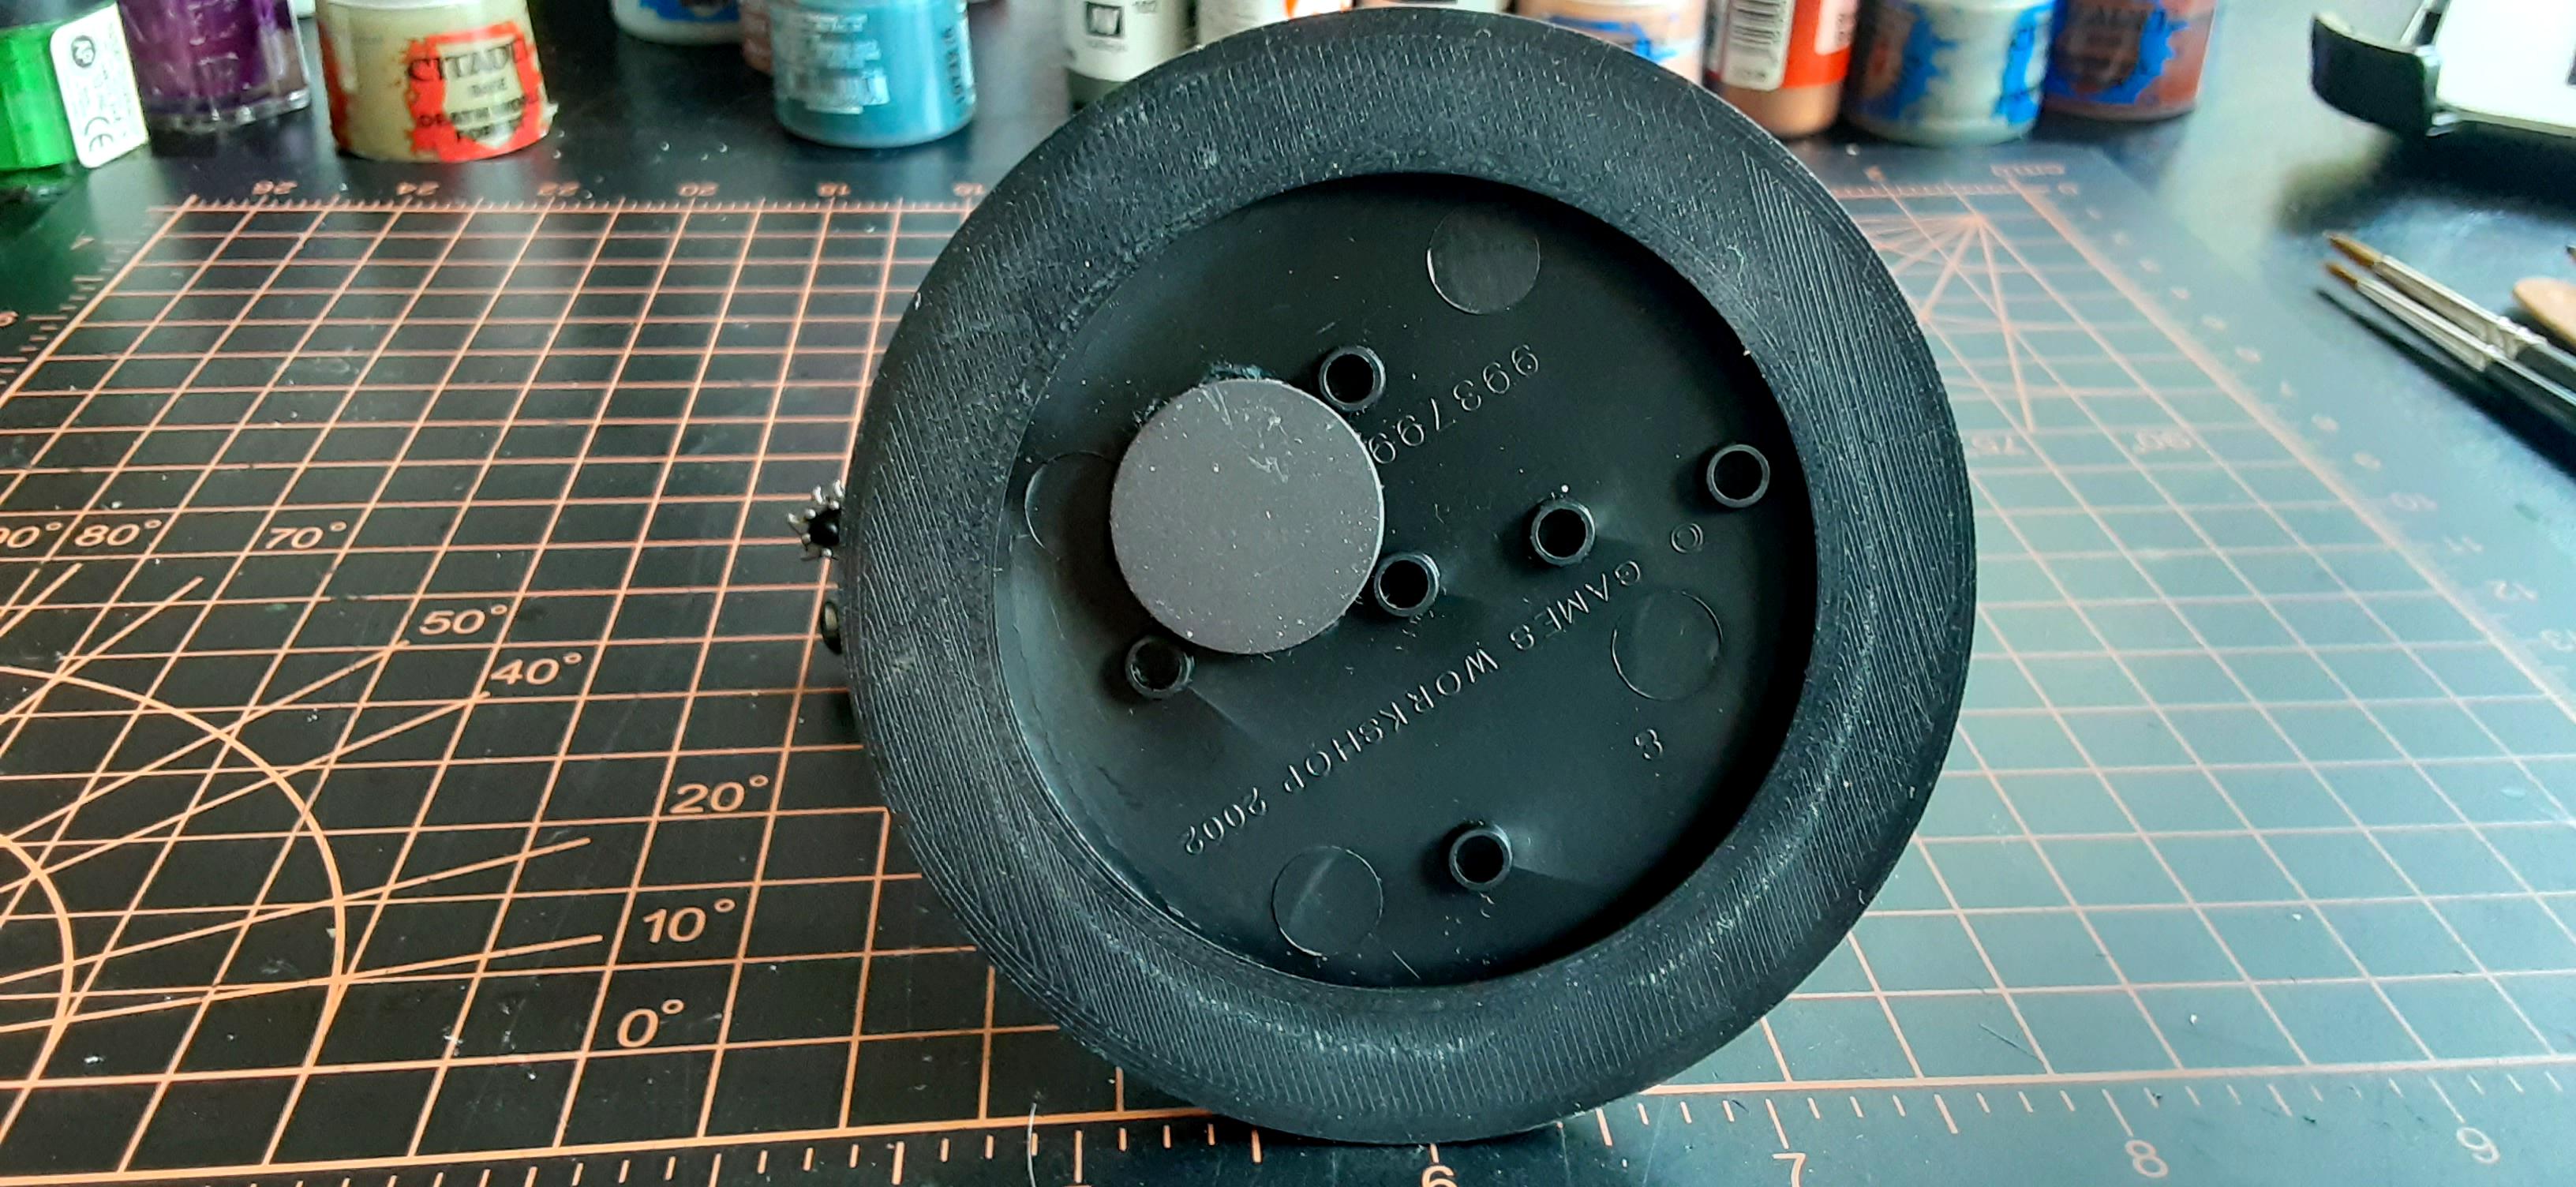 60mm, 65mm, 80mm, Adapter, Astra Militarum, Base, Imperial Guard, Ring, Sentinel, Warhammer 40,000